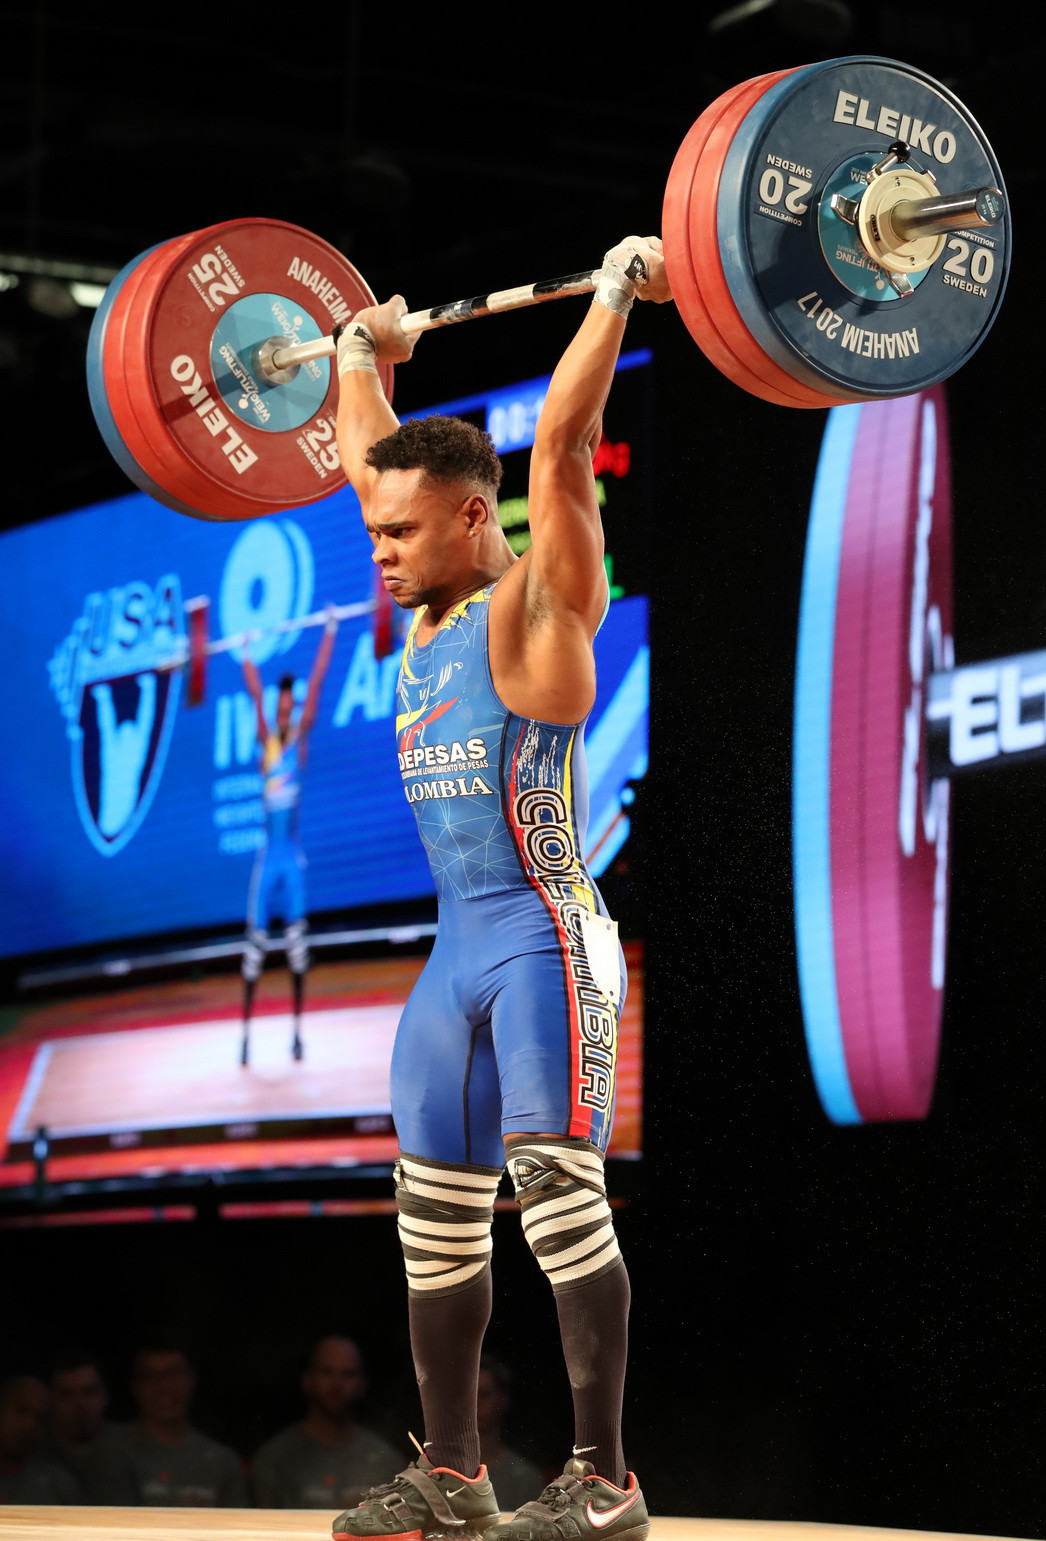 Colombia's Francisco Antonio Mosquera Valencia prevailed in the men's 62kg competition ©IWF